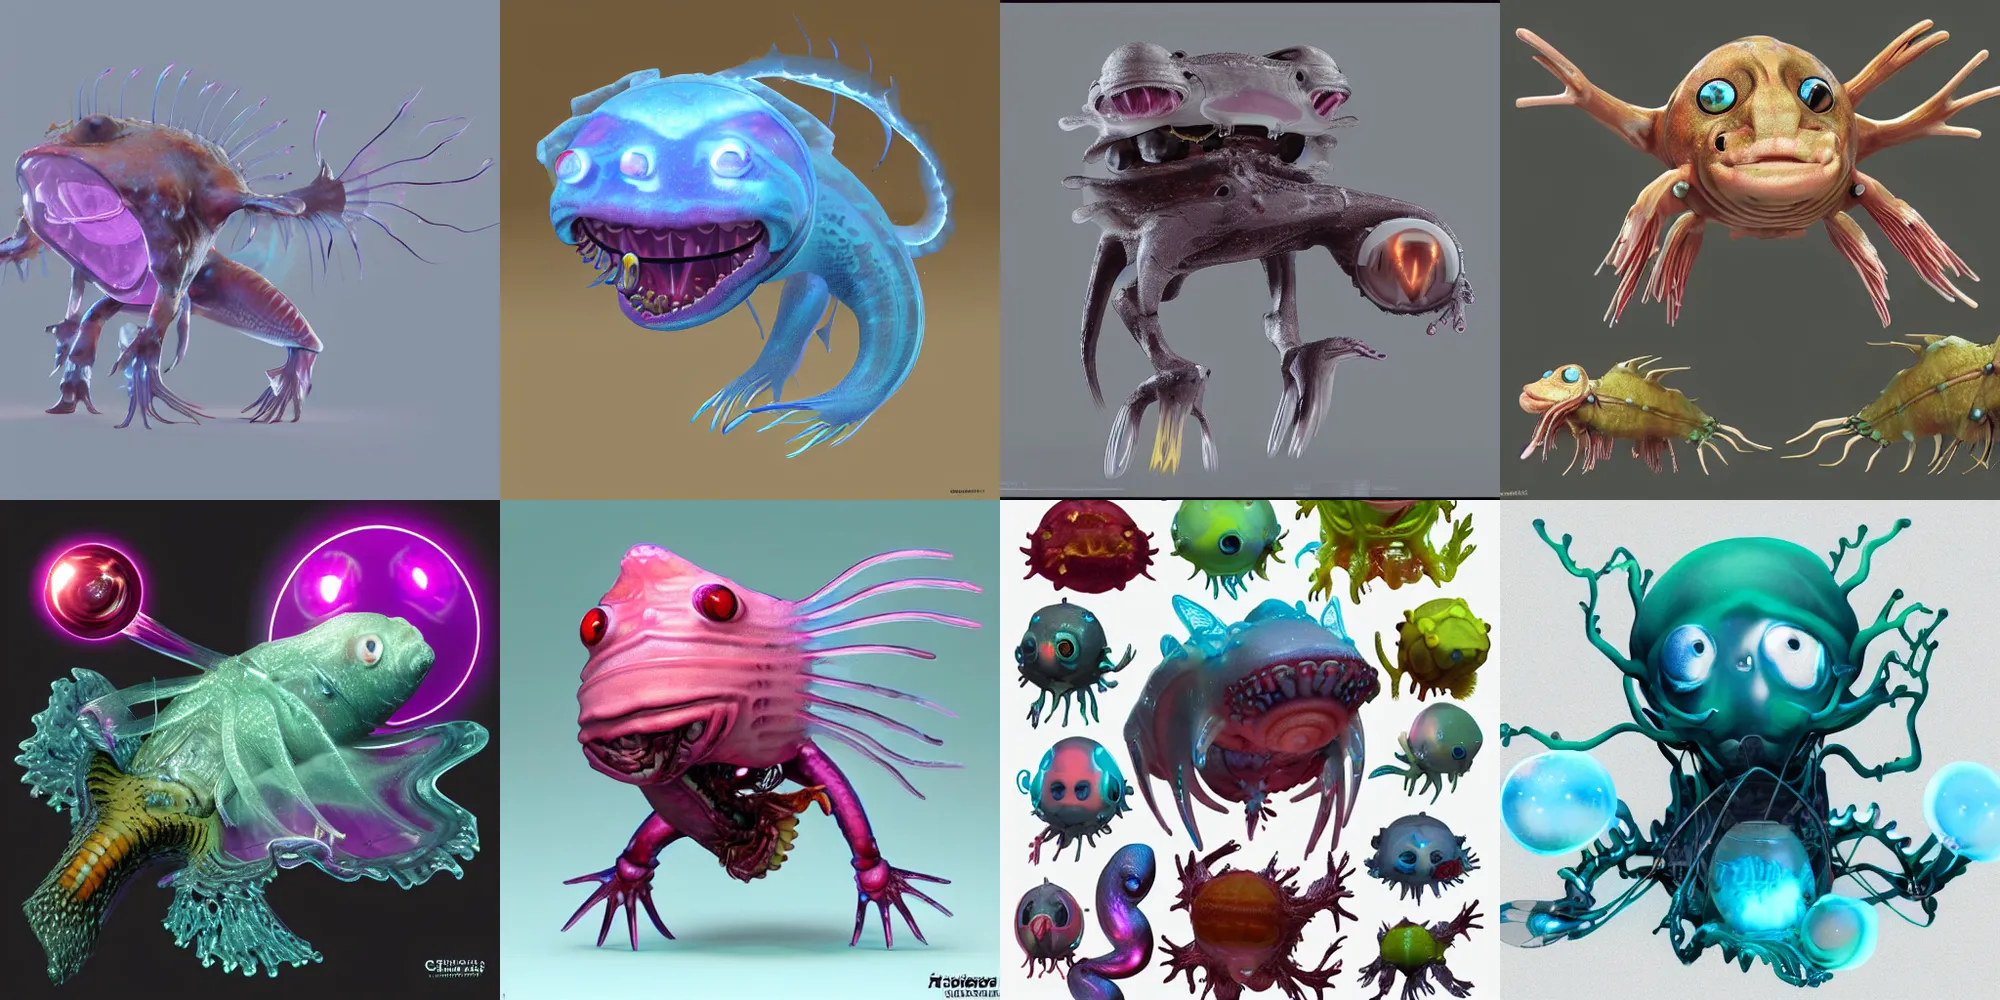 Prompt: cute! biomechanical axolotl, mouthbrooder, ghost shrimp, Barreleye fish, translucent SSS xray, Barreleye, rimlight, jelly fish dancing, fighting, bioluminescent screaming pictoplasma characterdesign toydesign toy monster creature, zbrush, octane, hardsurface modelling, artstation, cg society, by greg rutkowksi, by Eddie Mendoza, by Peter mohrbacher, by tooth wu, 8k